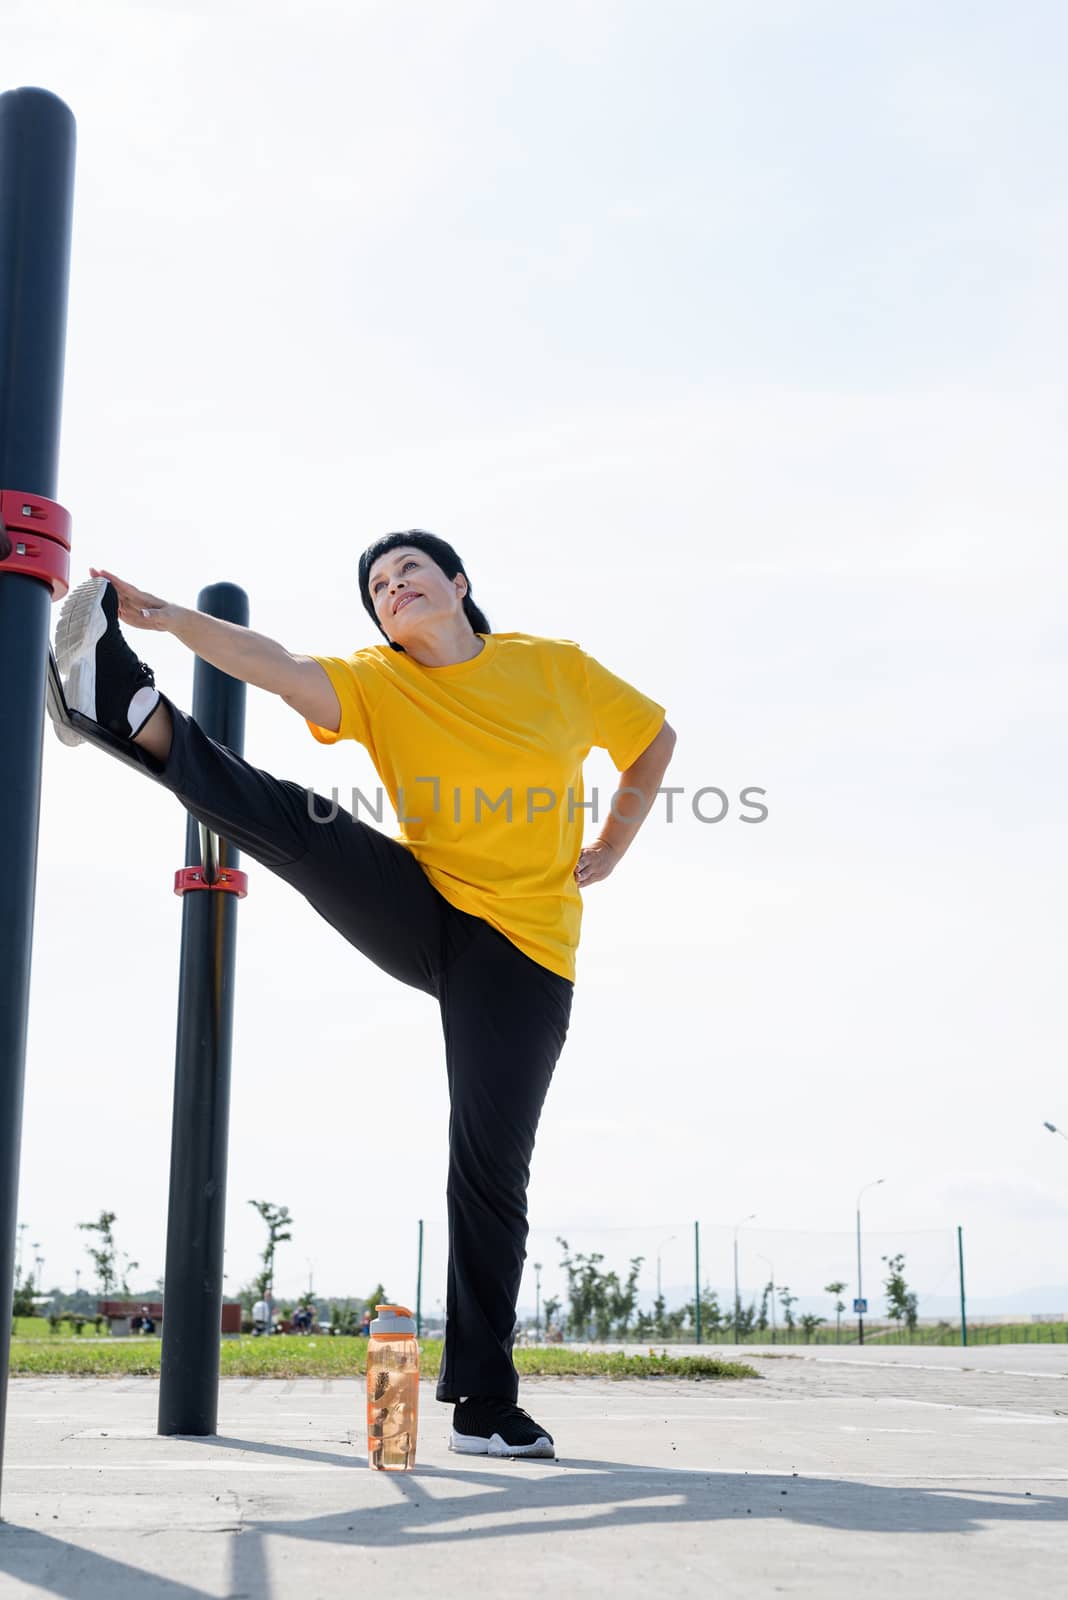 Sport and fitness. Senior sport. Active seniors. Senior woman stretching her legs outdoors on the sports ground